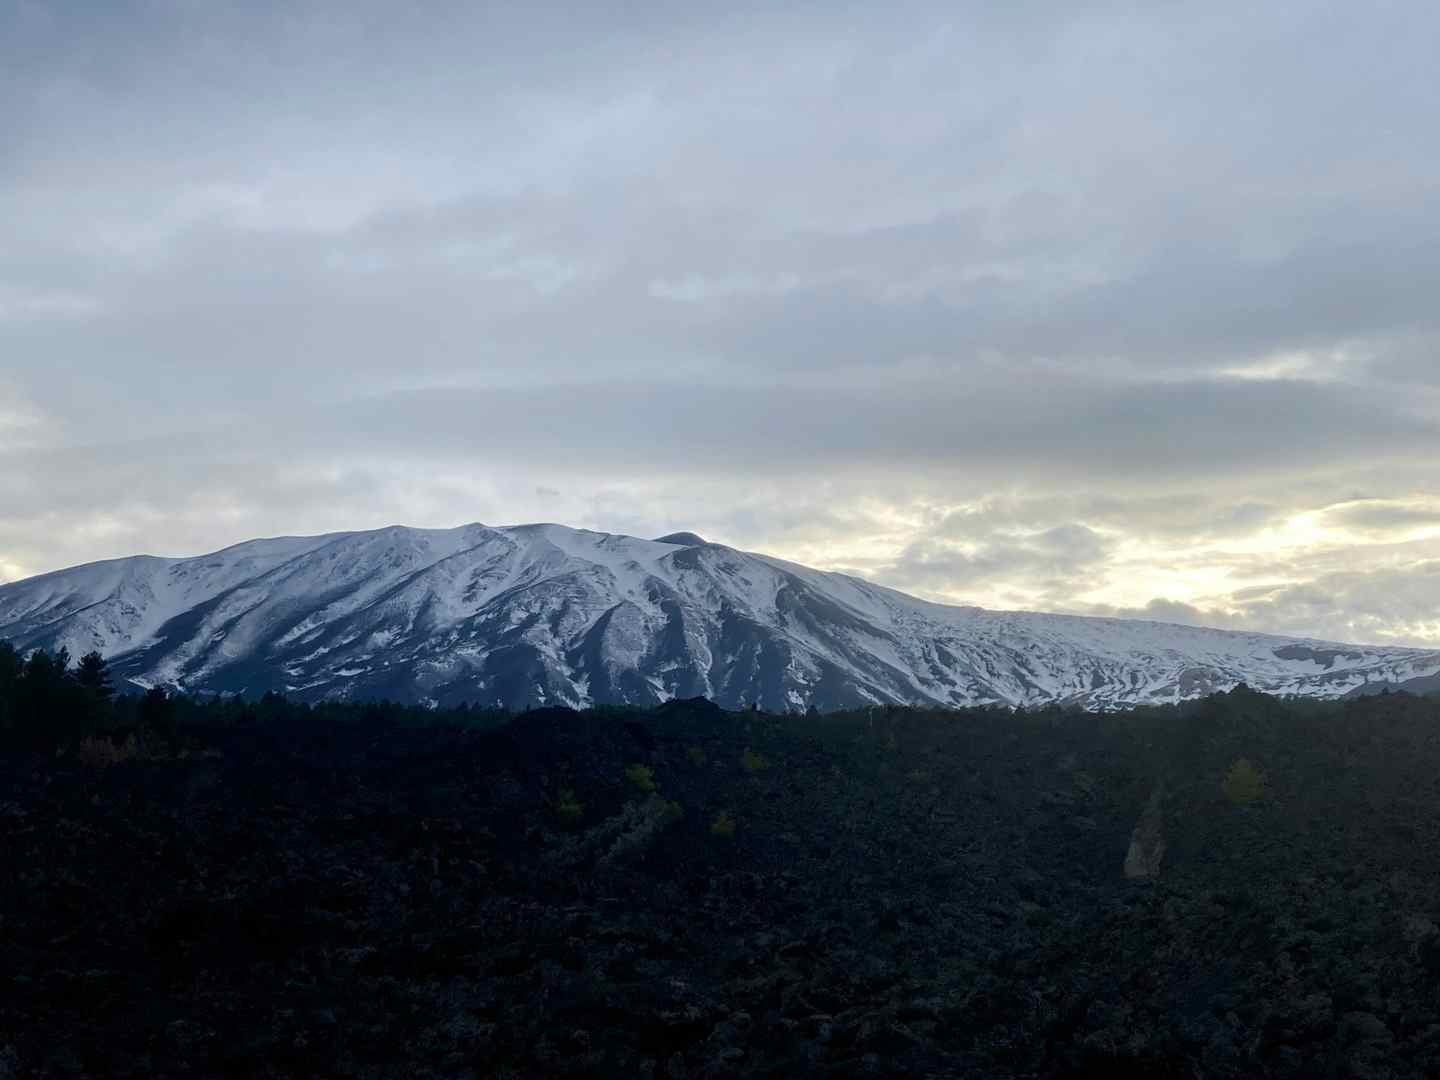 Experiencing the changing moods of Mt Etna